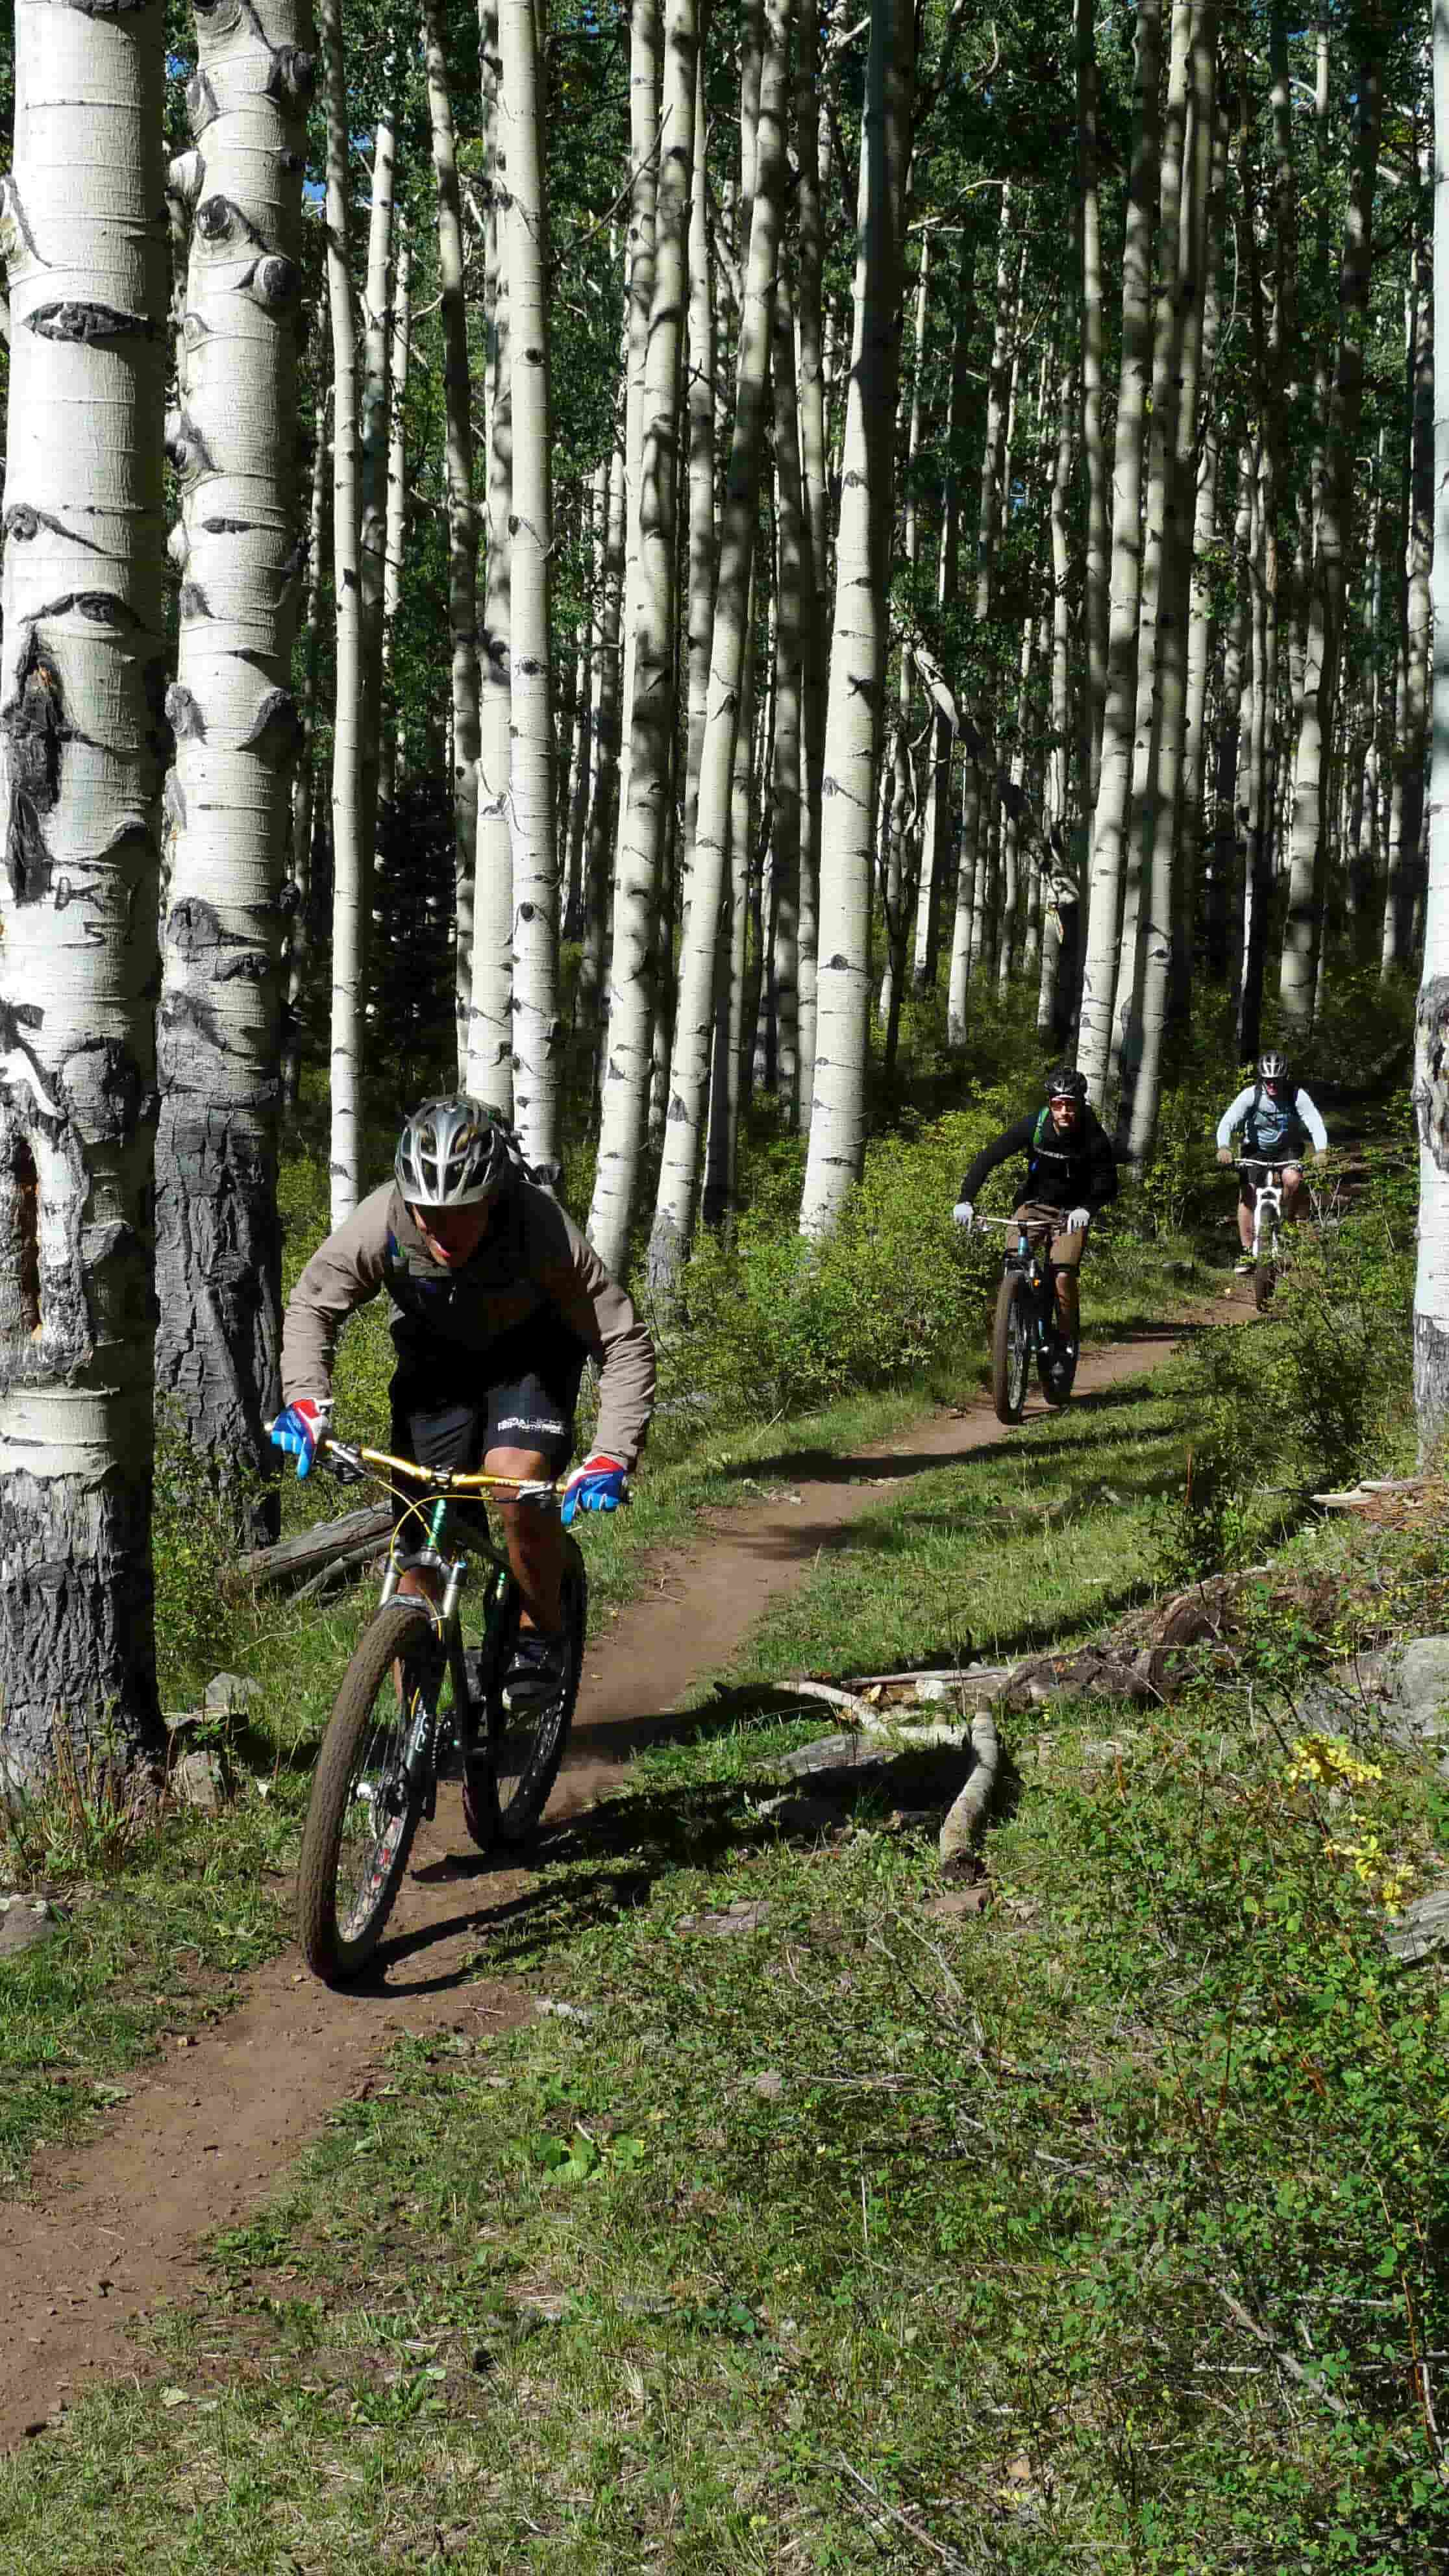 Front, left side view of 3 cyclists, riding their Surly bikes single filed, up an incline on a dirt trail in the forest